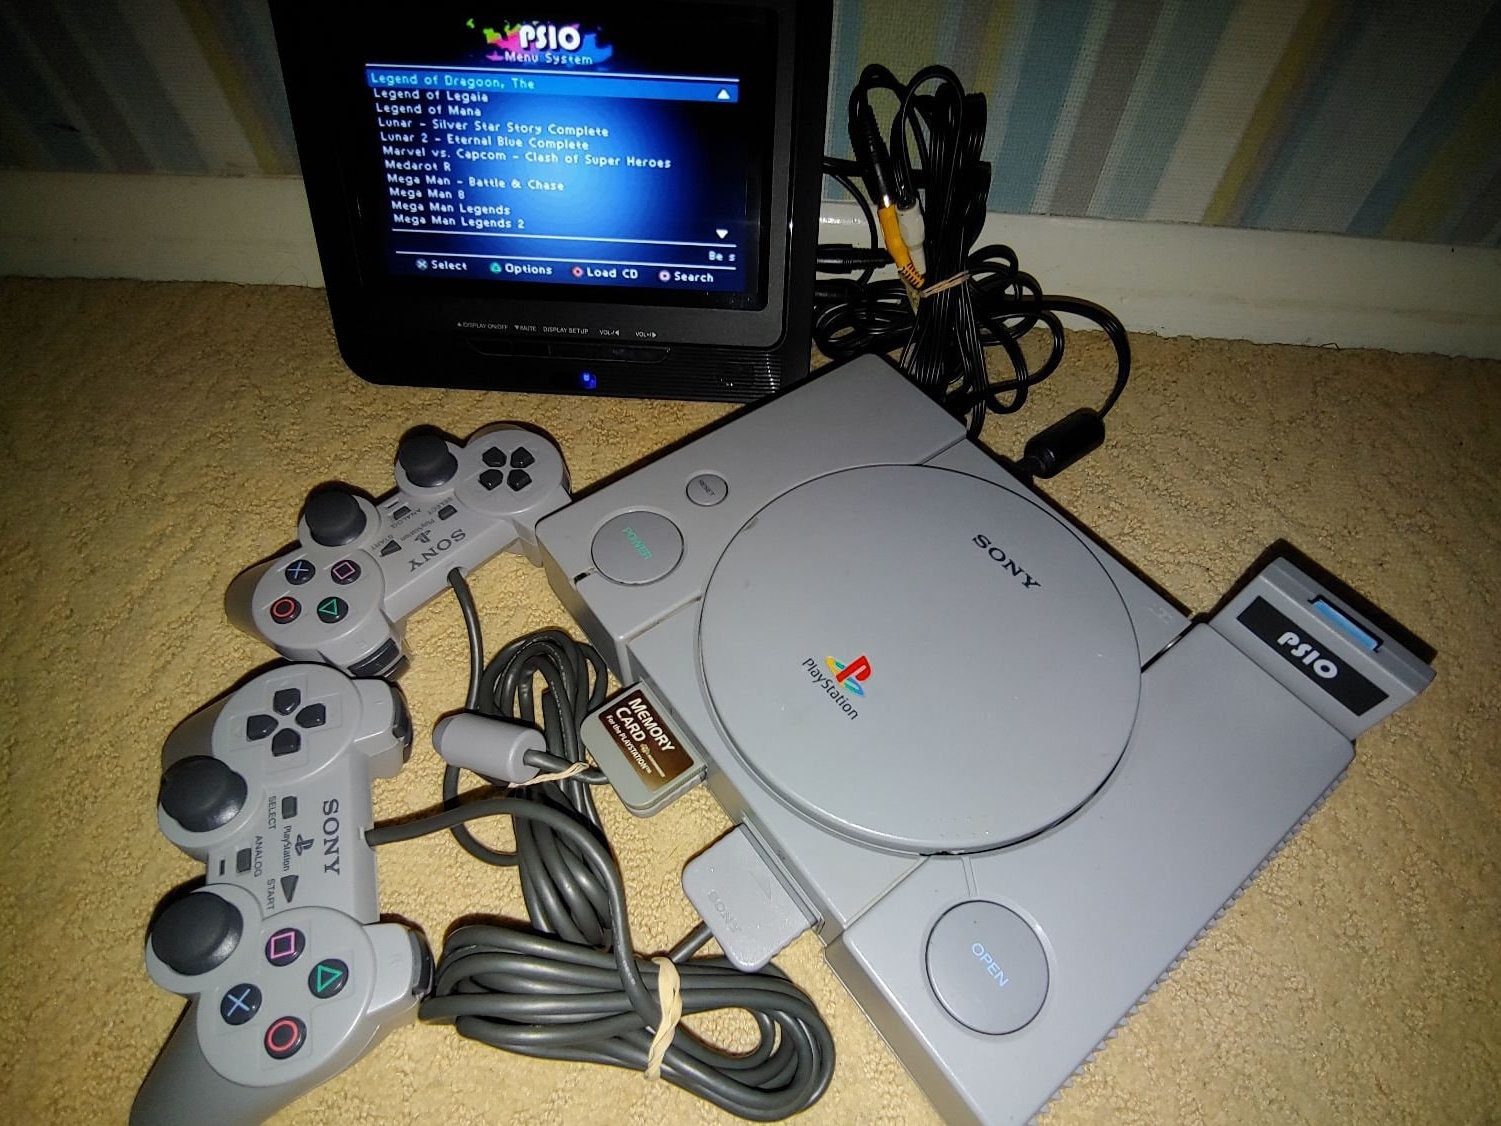 Katastrofe Great Barrier Reef skære ned Playstation 1 Console - Etsy